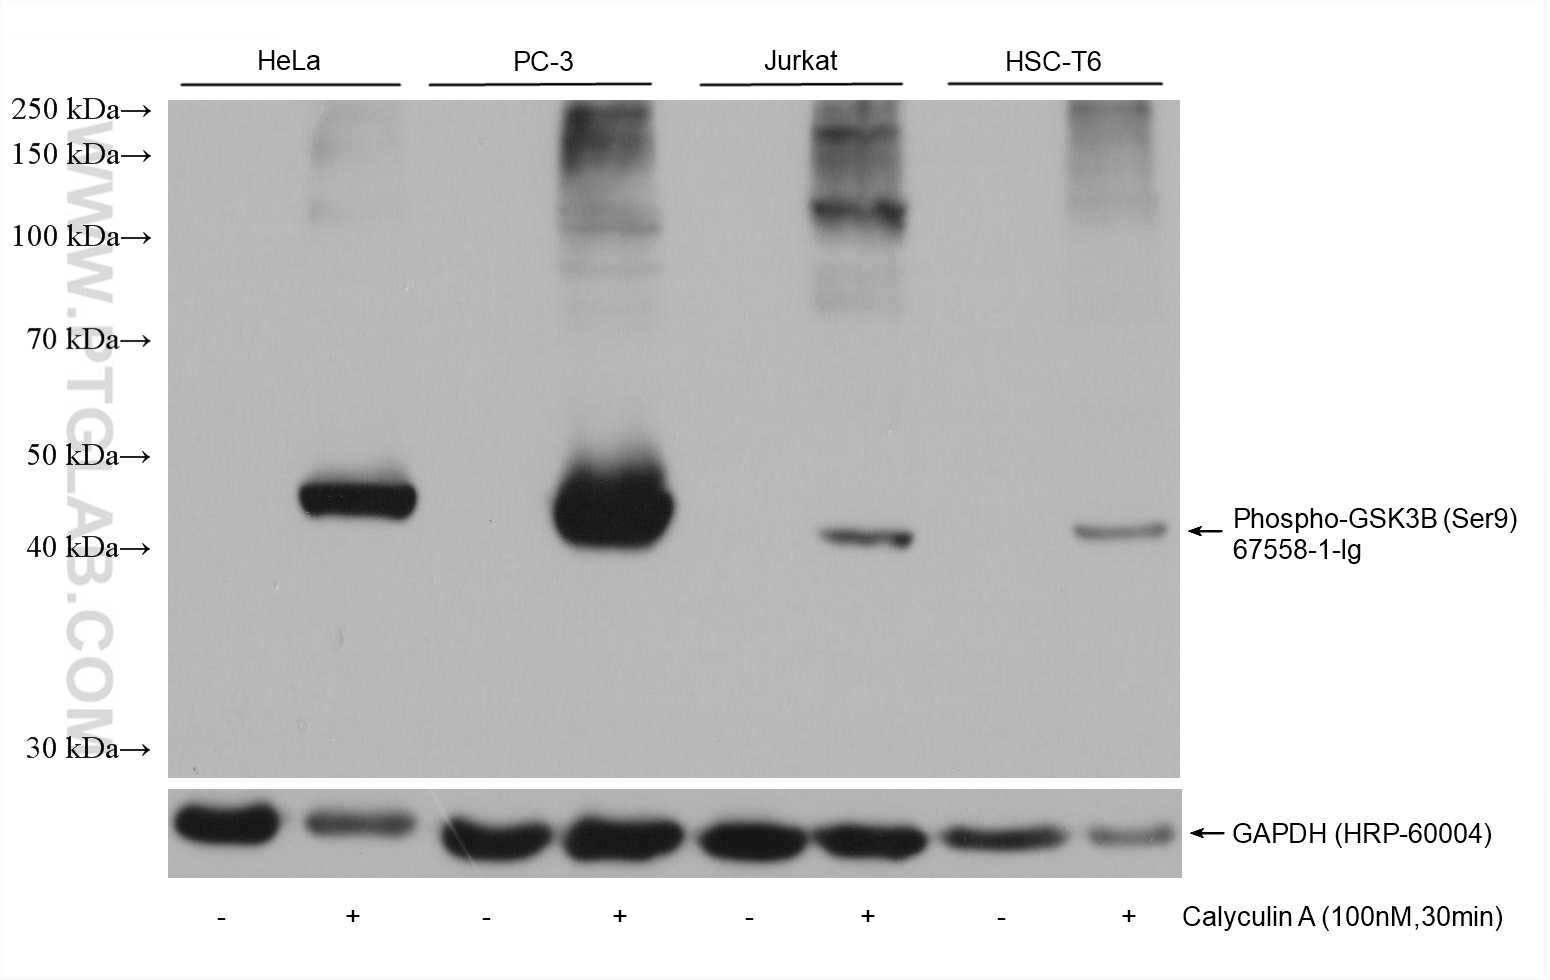 Non-treated and Calyculin A treated cell lysates were subjected to SDS PAGE followed by western blot with 67558-1-Ig (Phospho-GSK3B (Ser9) antibody) at dilution of 1:5000 incubated at room temperature for 1.5 hours. The membrane was stripped and reblotted with HRP-conjugated GAPDH Monoclonal antibody (HRP-60004) as loading control.